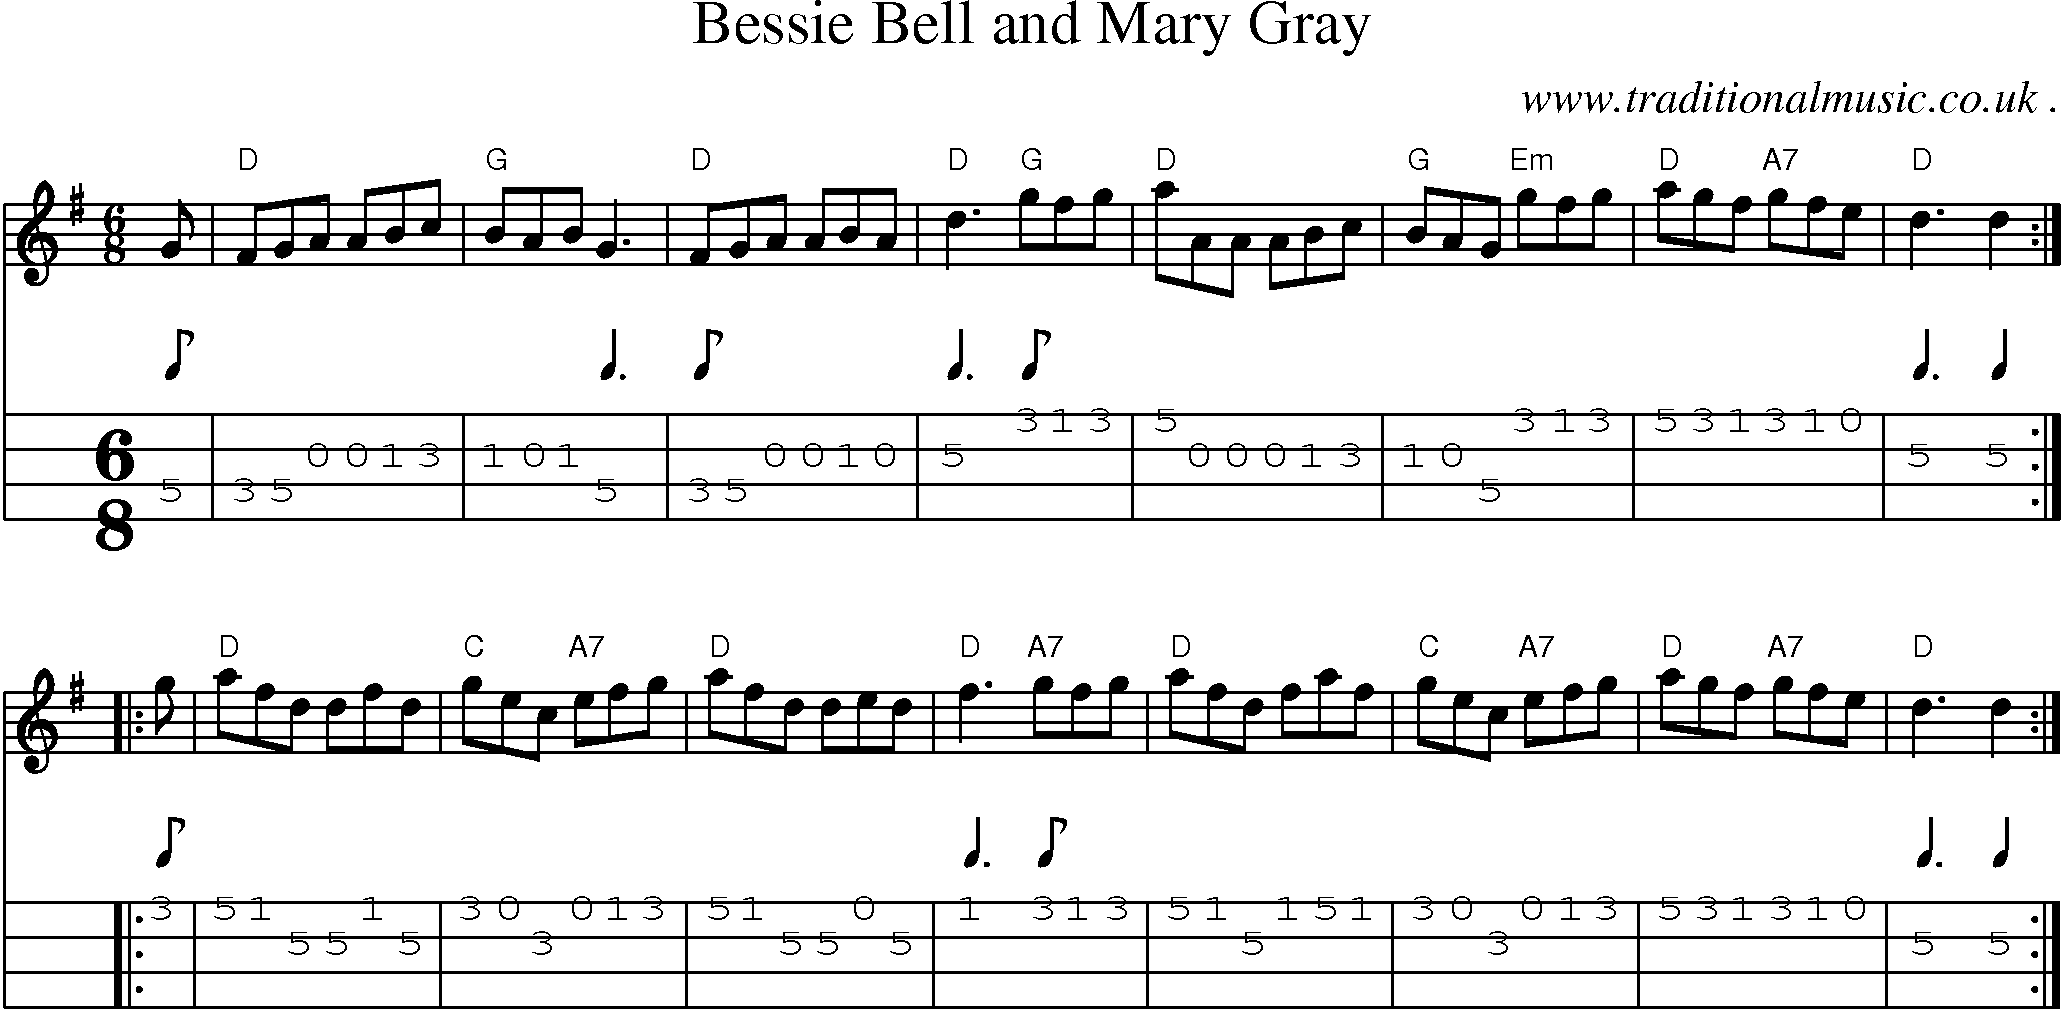 Sheet-music  score, Chords and Mandolin Tabs for Bessie Bell And Mary Gray